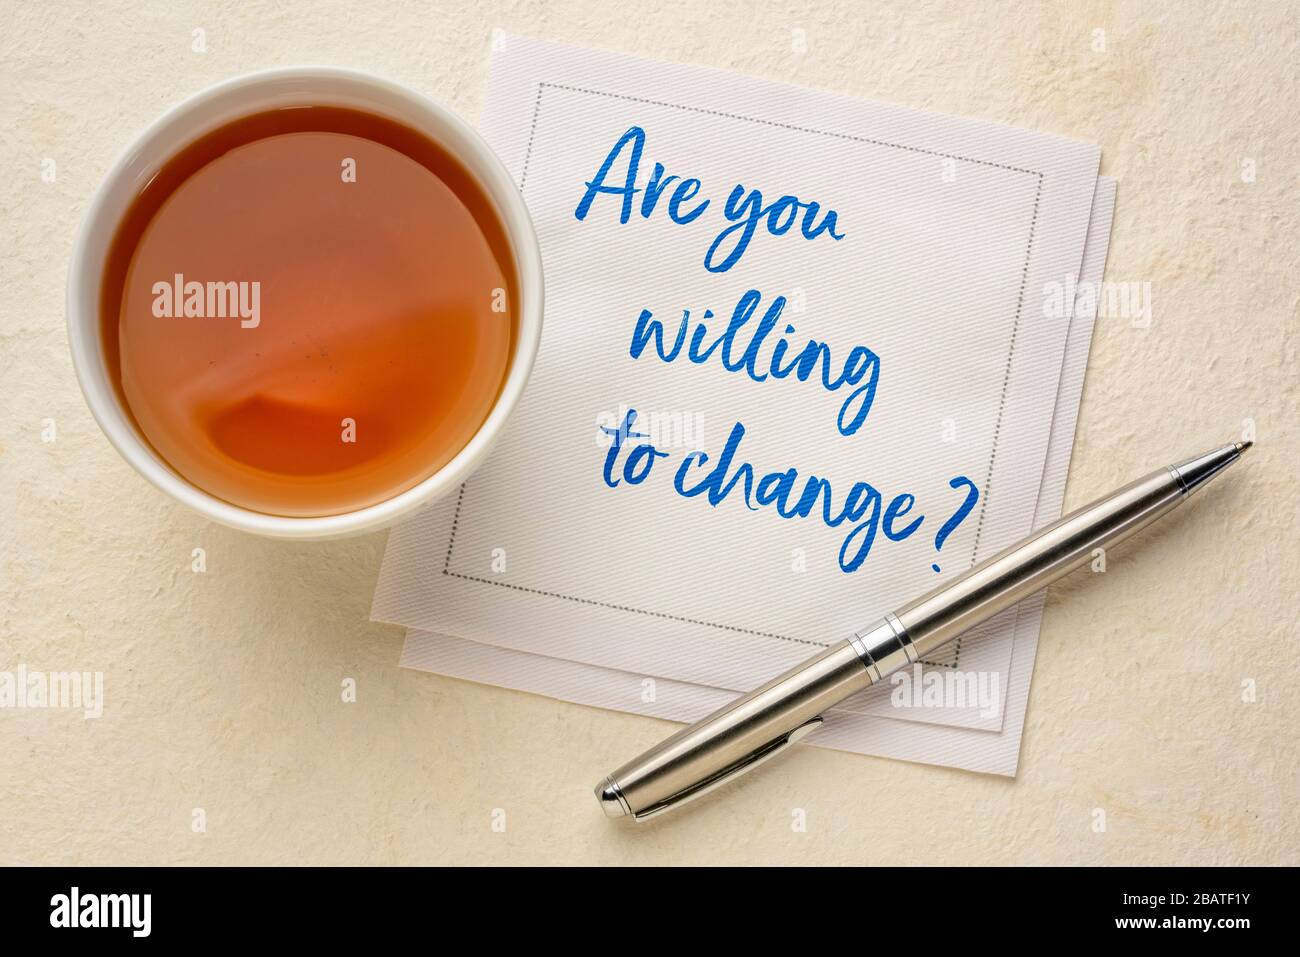 Are you willing to change? Handwriting on a napkin with a cup of tea. Self improvement and personal development concept. Stock Photo